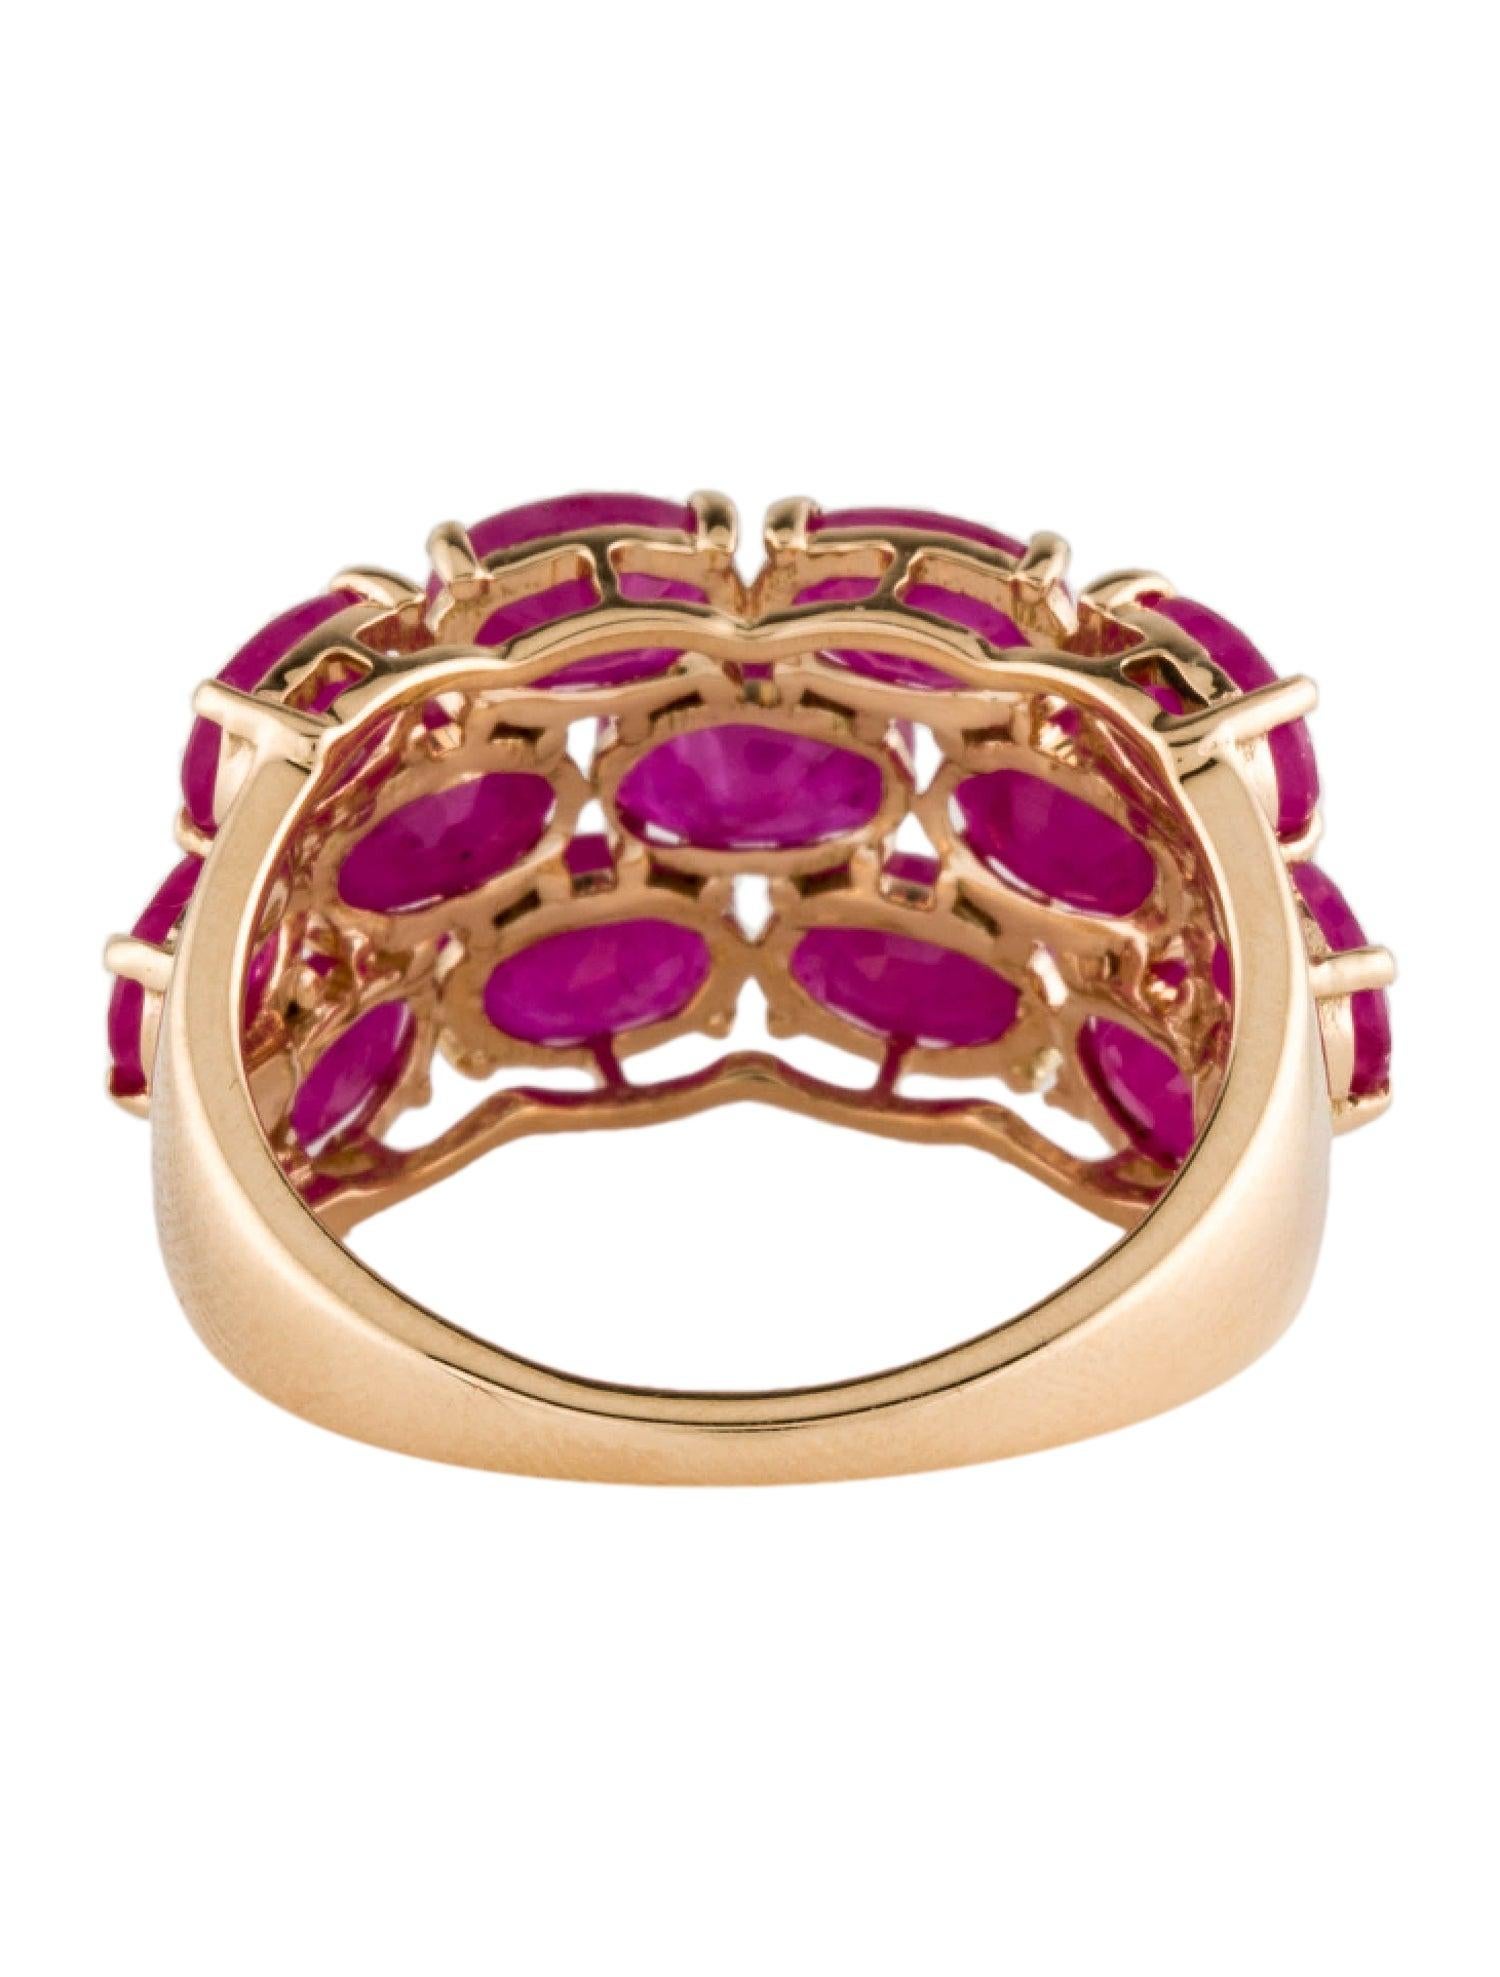 Oval Cut Luxurious 14K Ruby Cocktail Ring - 5.61ctw Gemstones - Size 6.75  Vintage Ring For Sale